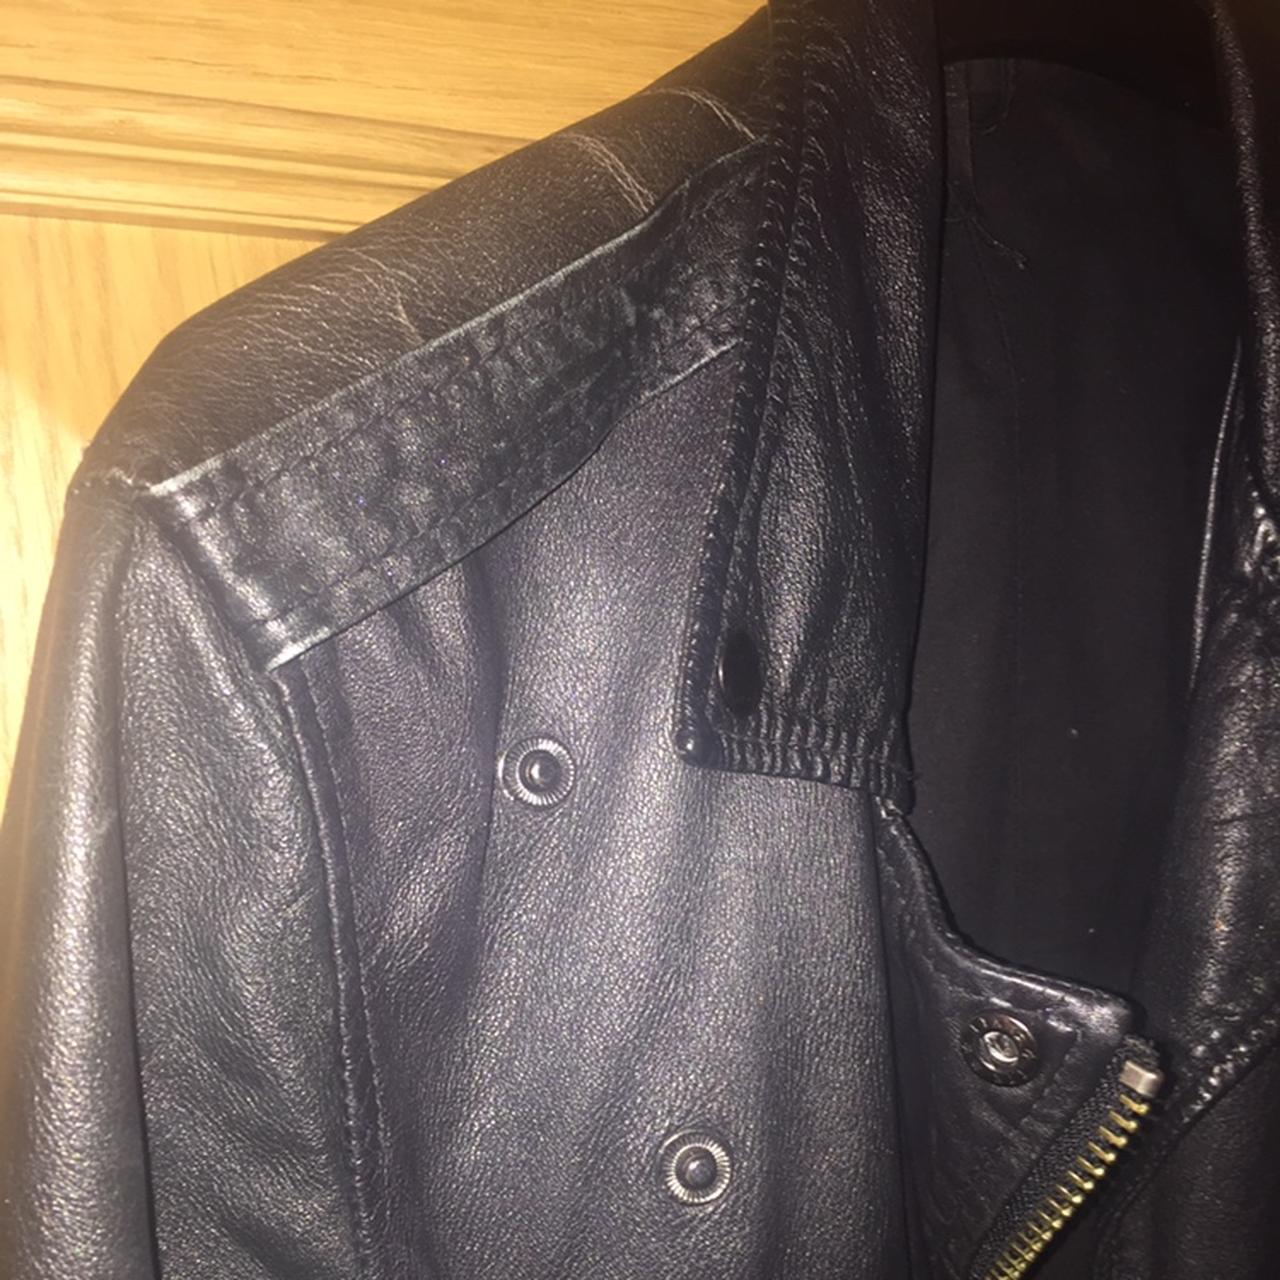 Vintage Topshop leather jacket. Size 10 This is a... - Depop